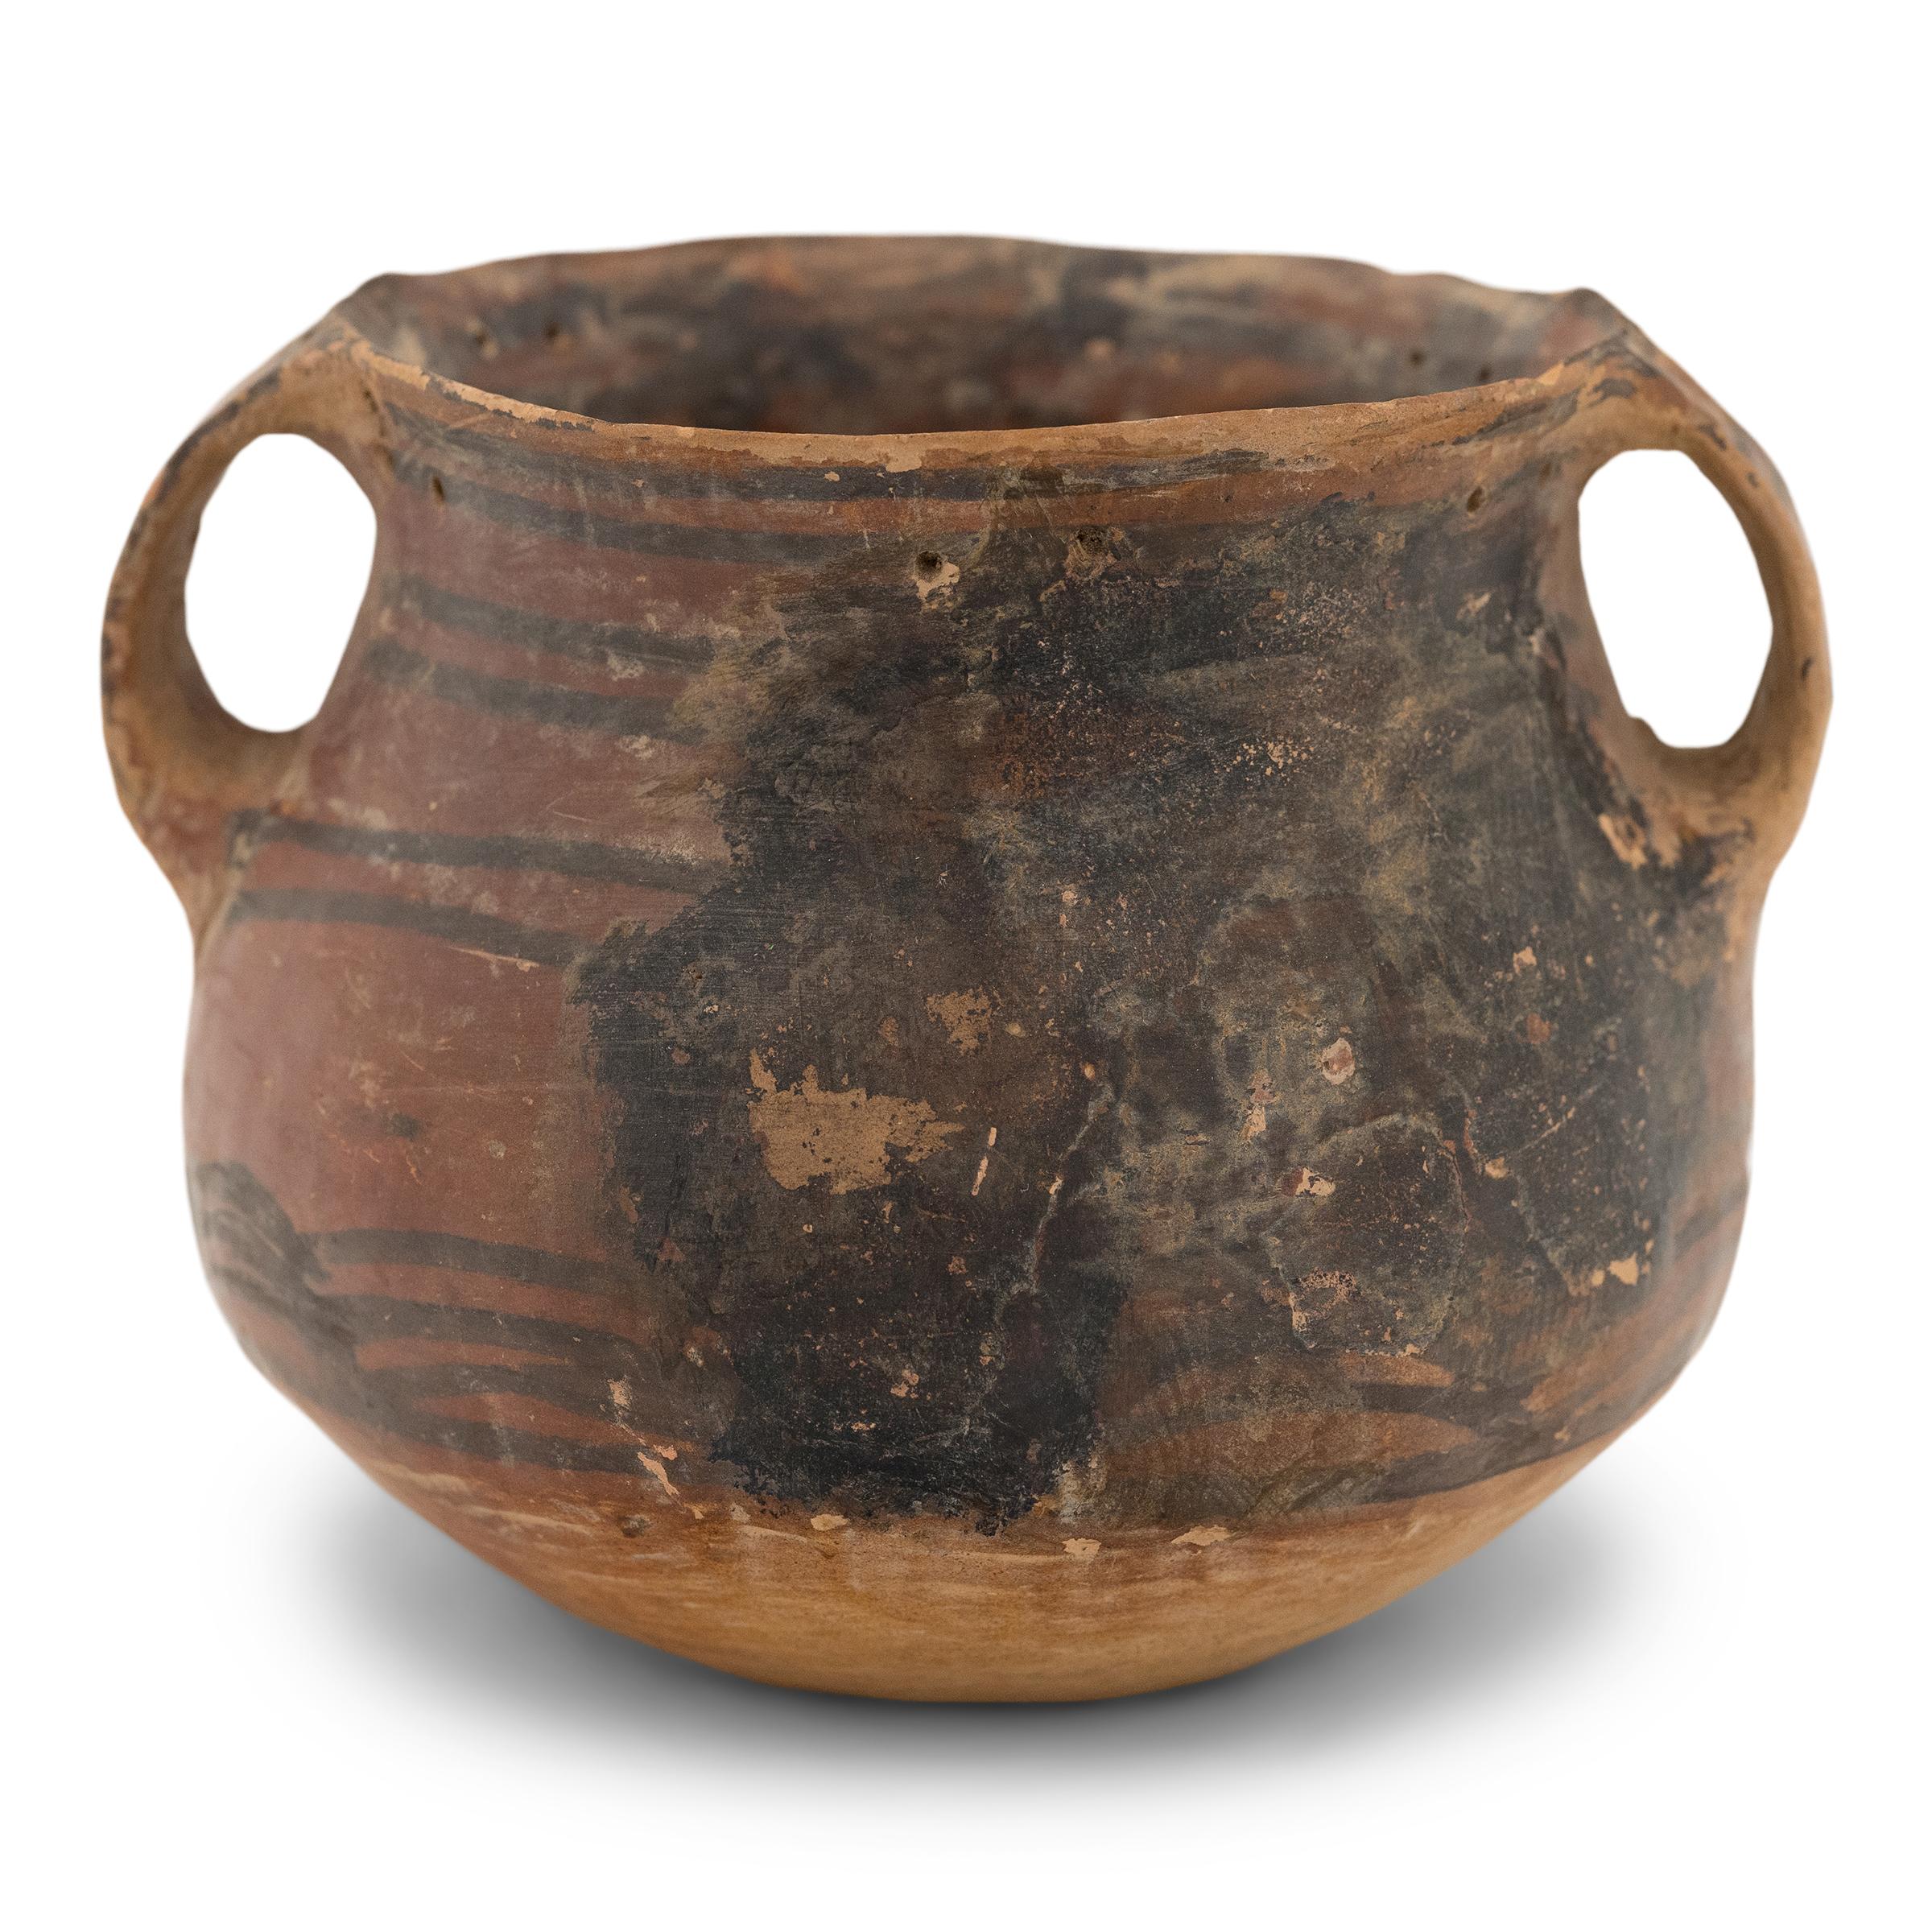 This petite ceramic jar is believed to be a later example of Neolithic Chinese redware pottery of the Yangshao culture. Although its exact age is unknown, the jar was likely created around 5000–3000 B.C.E.. Hand coiled and burnished on a